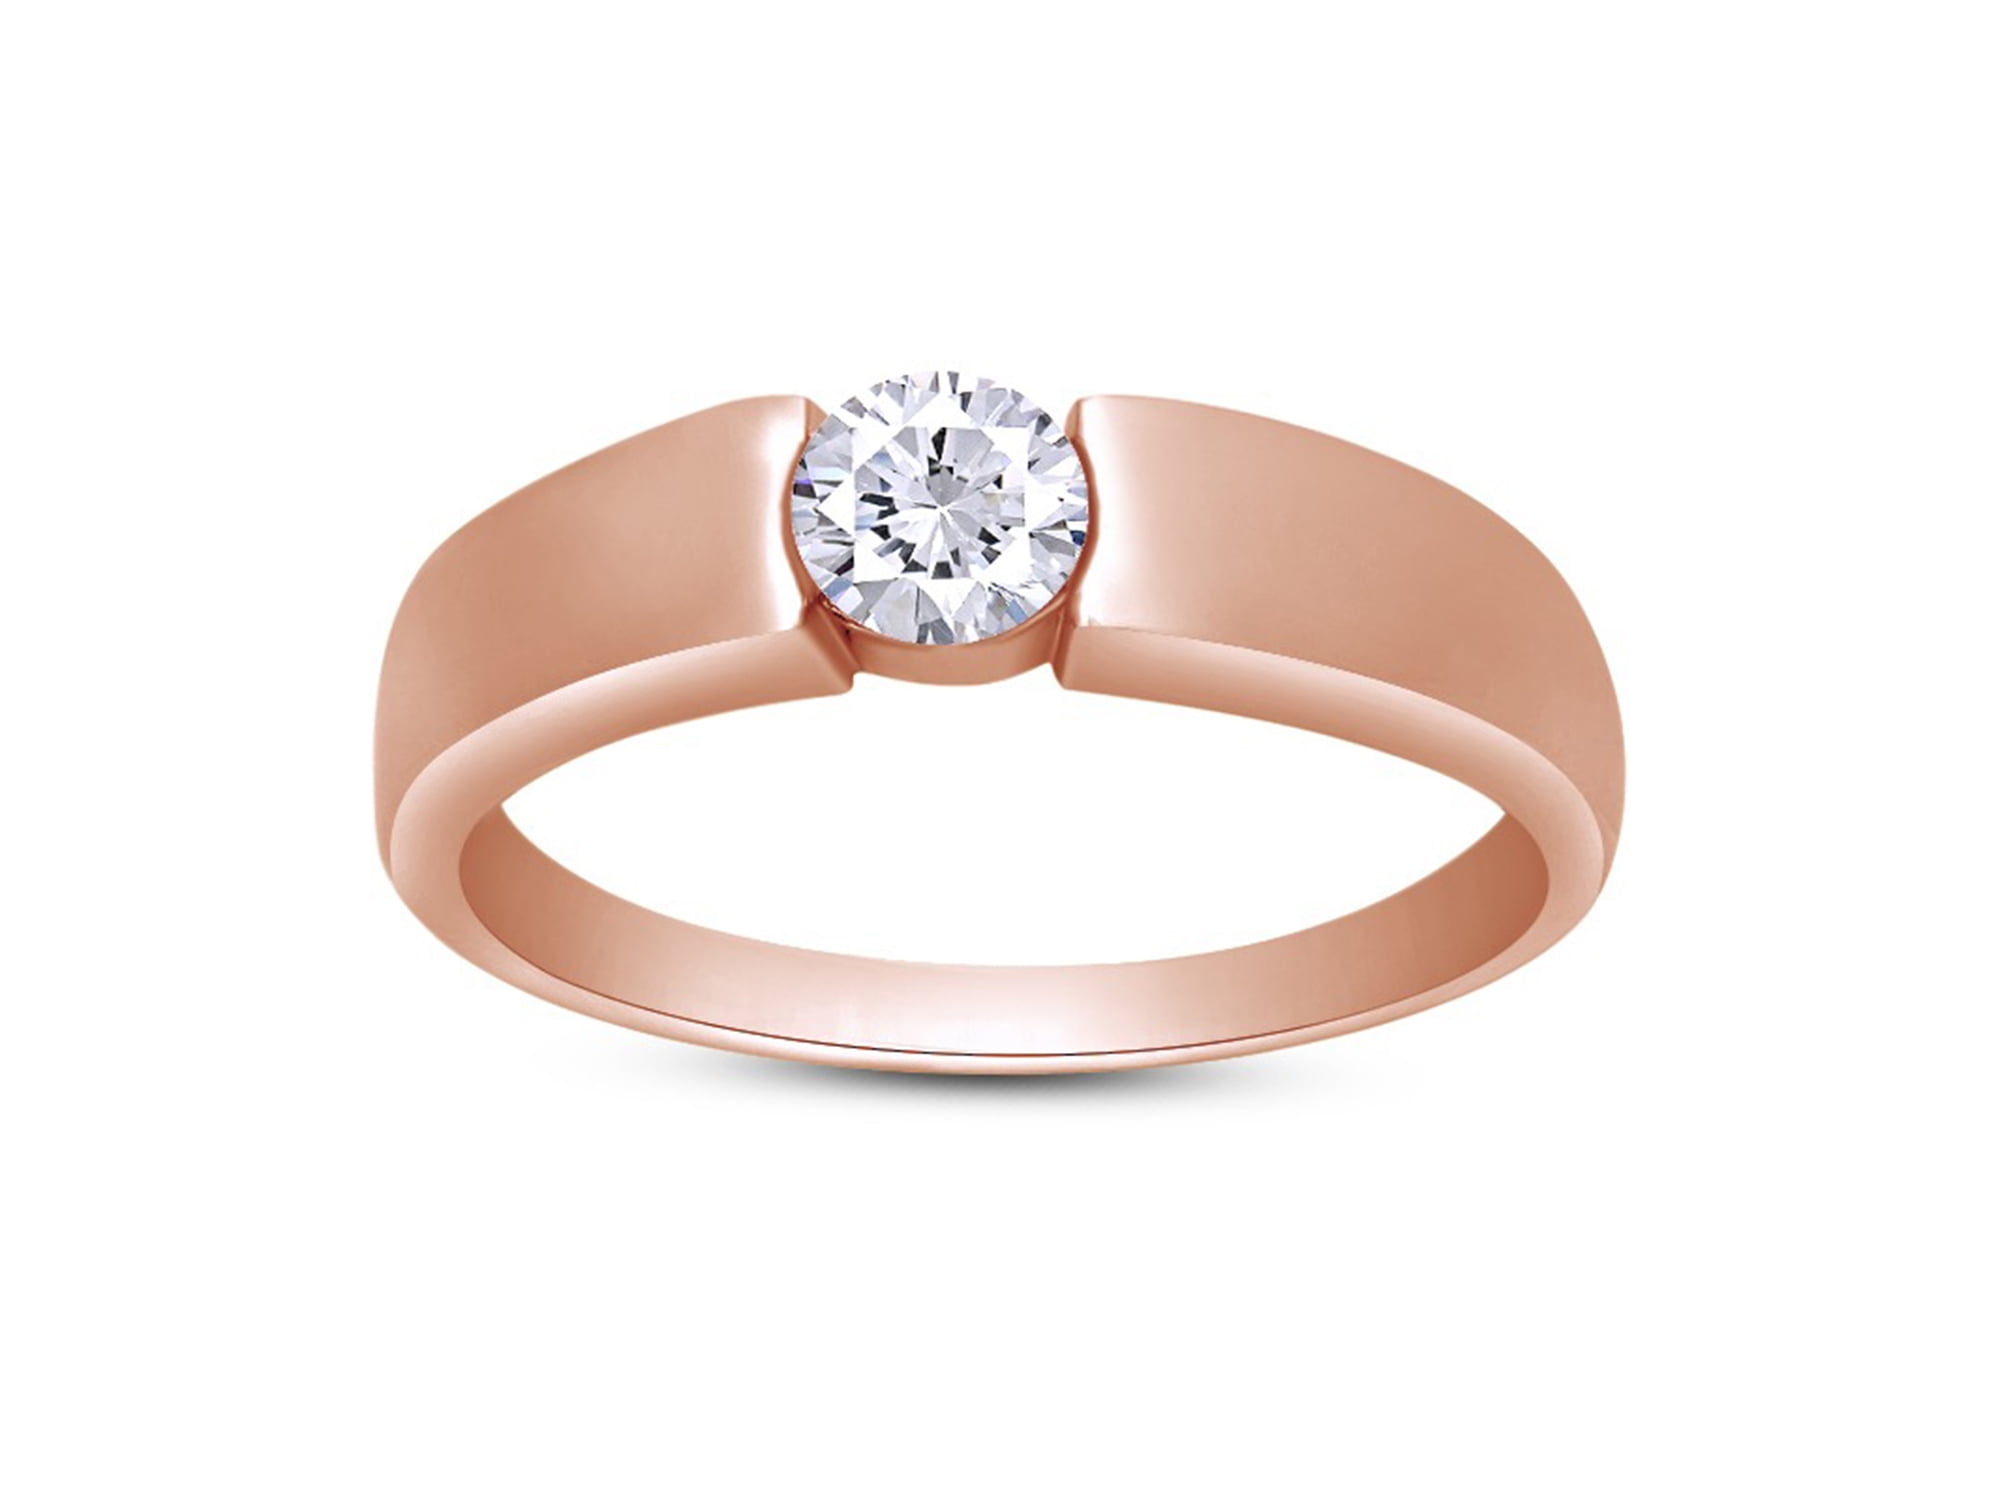 AFFY White Cubic Zirconia Anniversary Wedding Band Ring 14k Rose Gold Over Sterling Silver Ring Size 11.5 